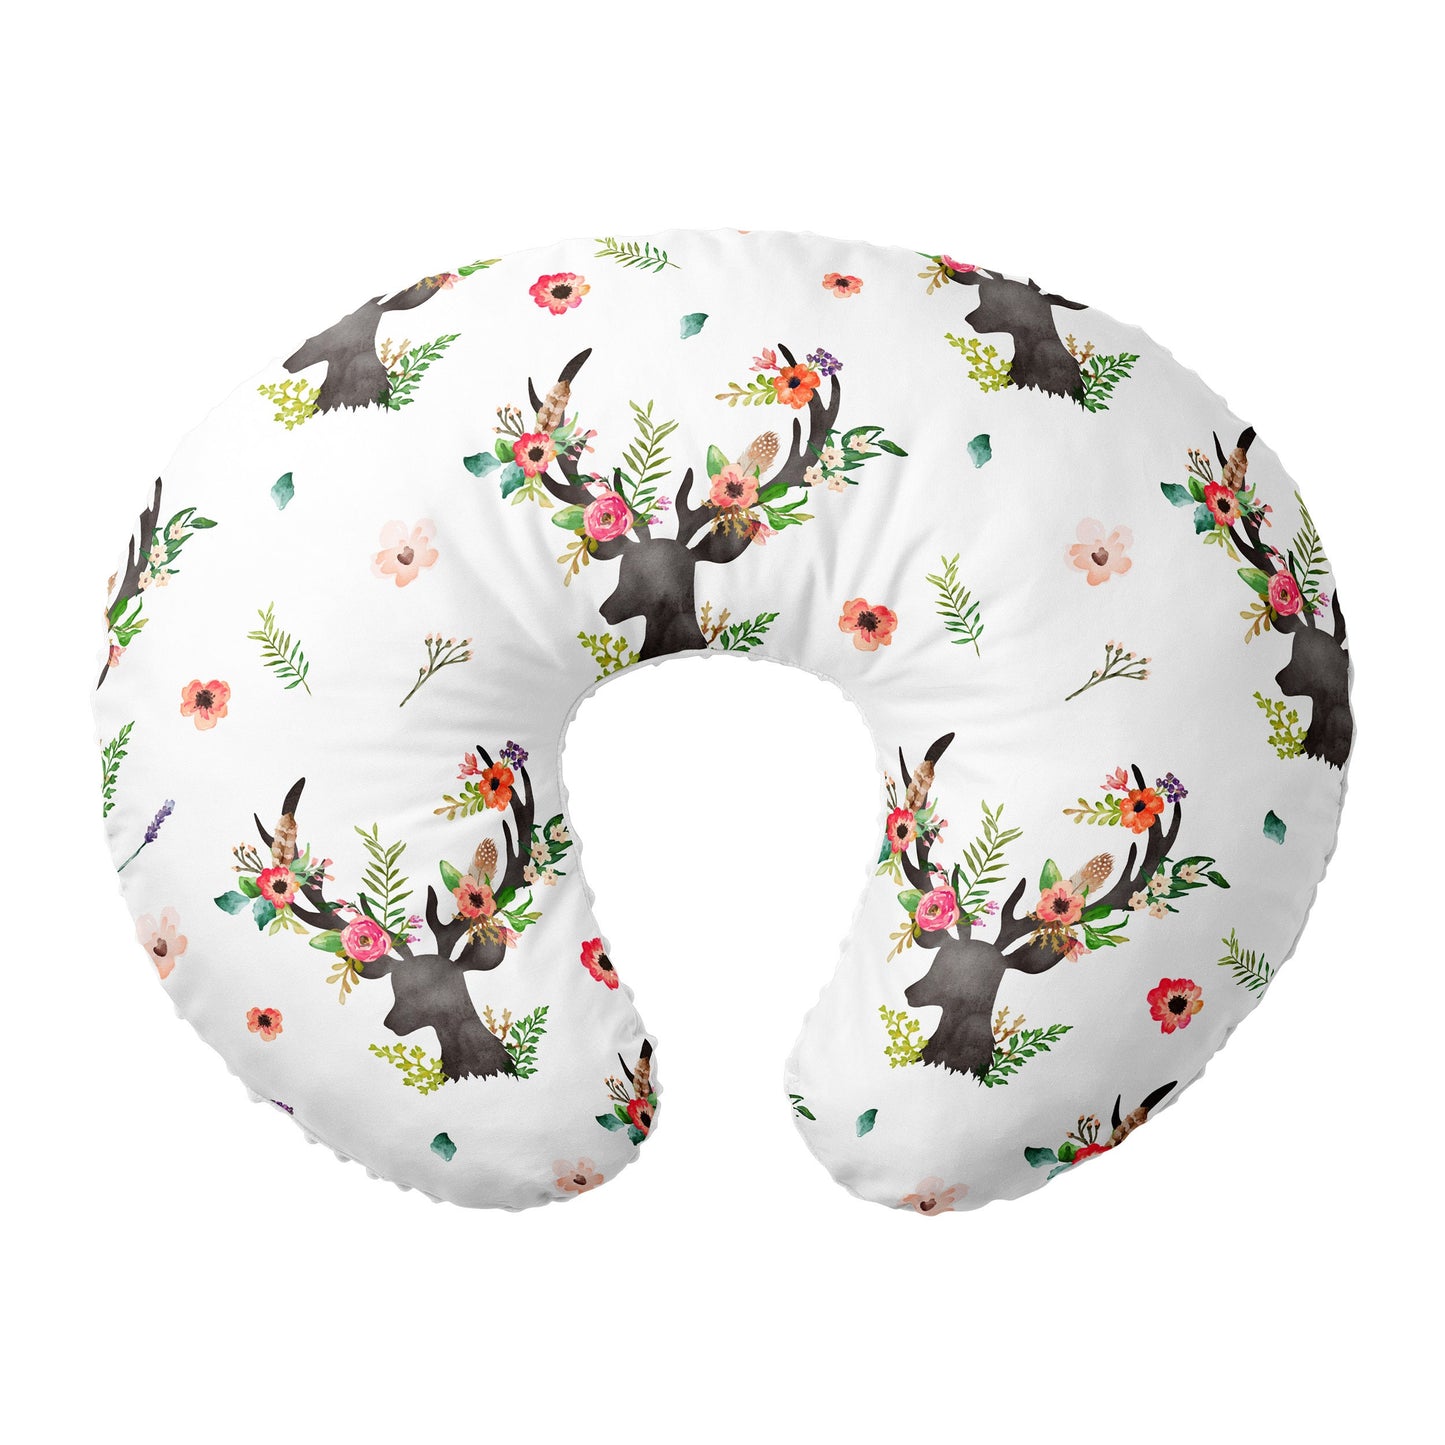 Nursing Pillow Cover, 100% Cotton ,  Slipcover Minky Boy Girl - Woodland Nursery Decor for Baby Boys and Girls Pillow Cover (Floral deer)